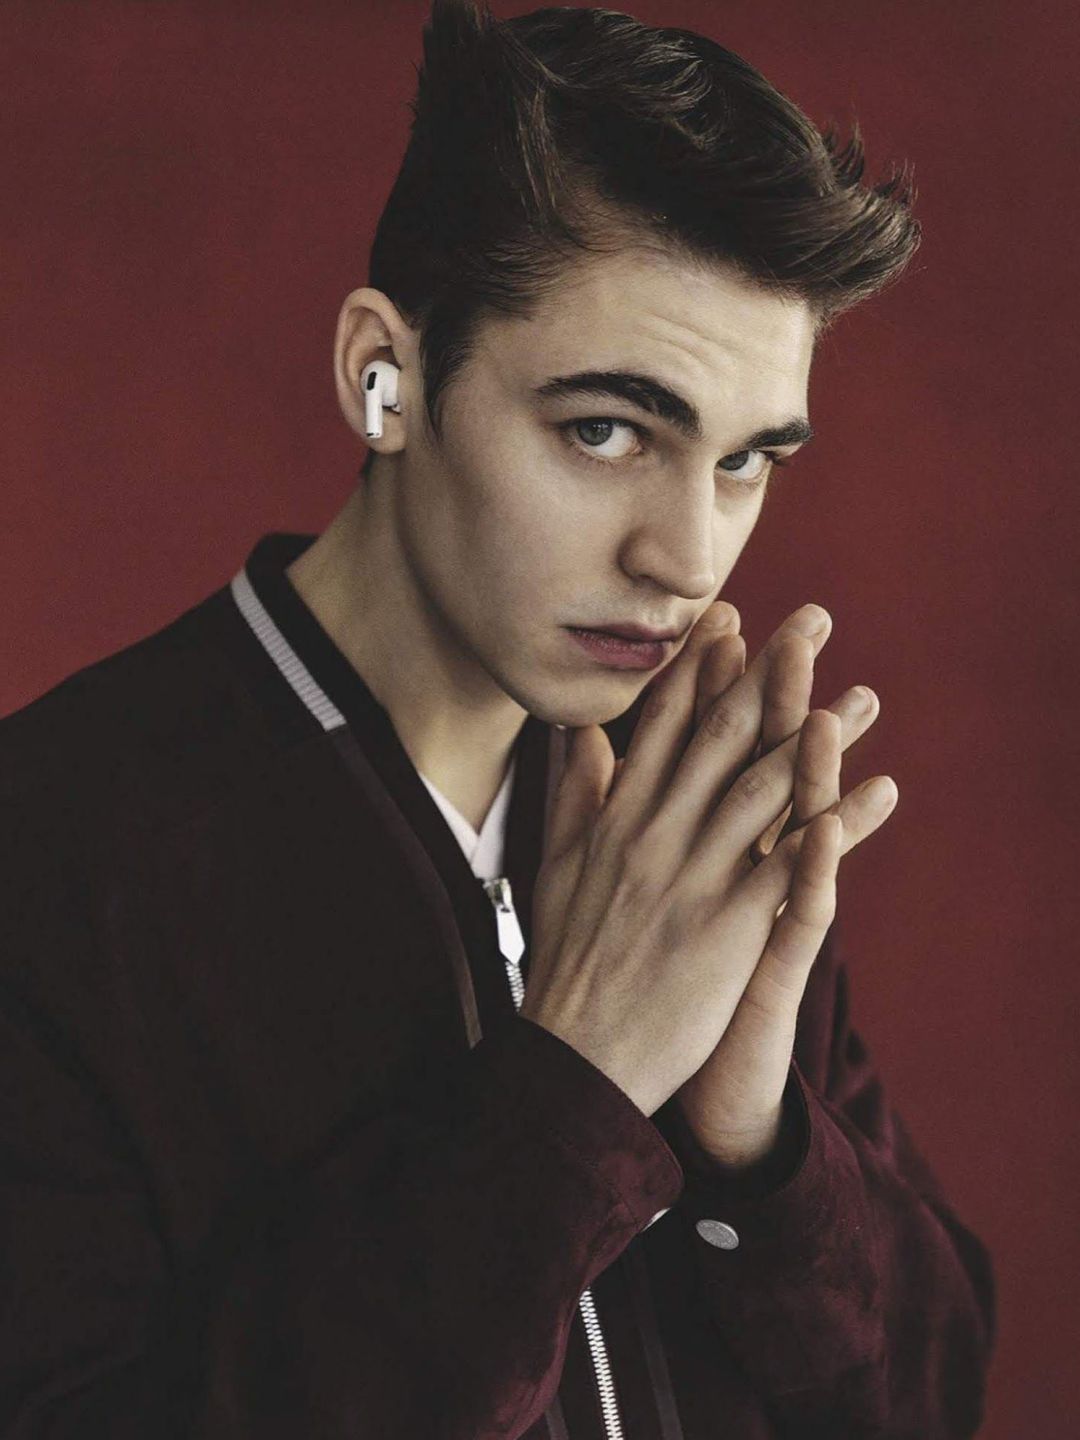 Hero Fiennes-Tiffin height and weight